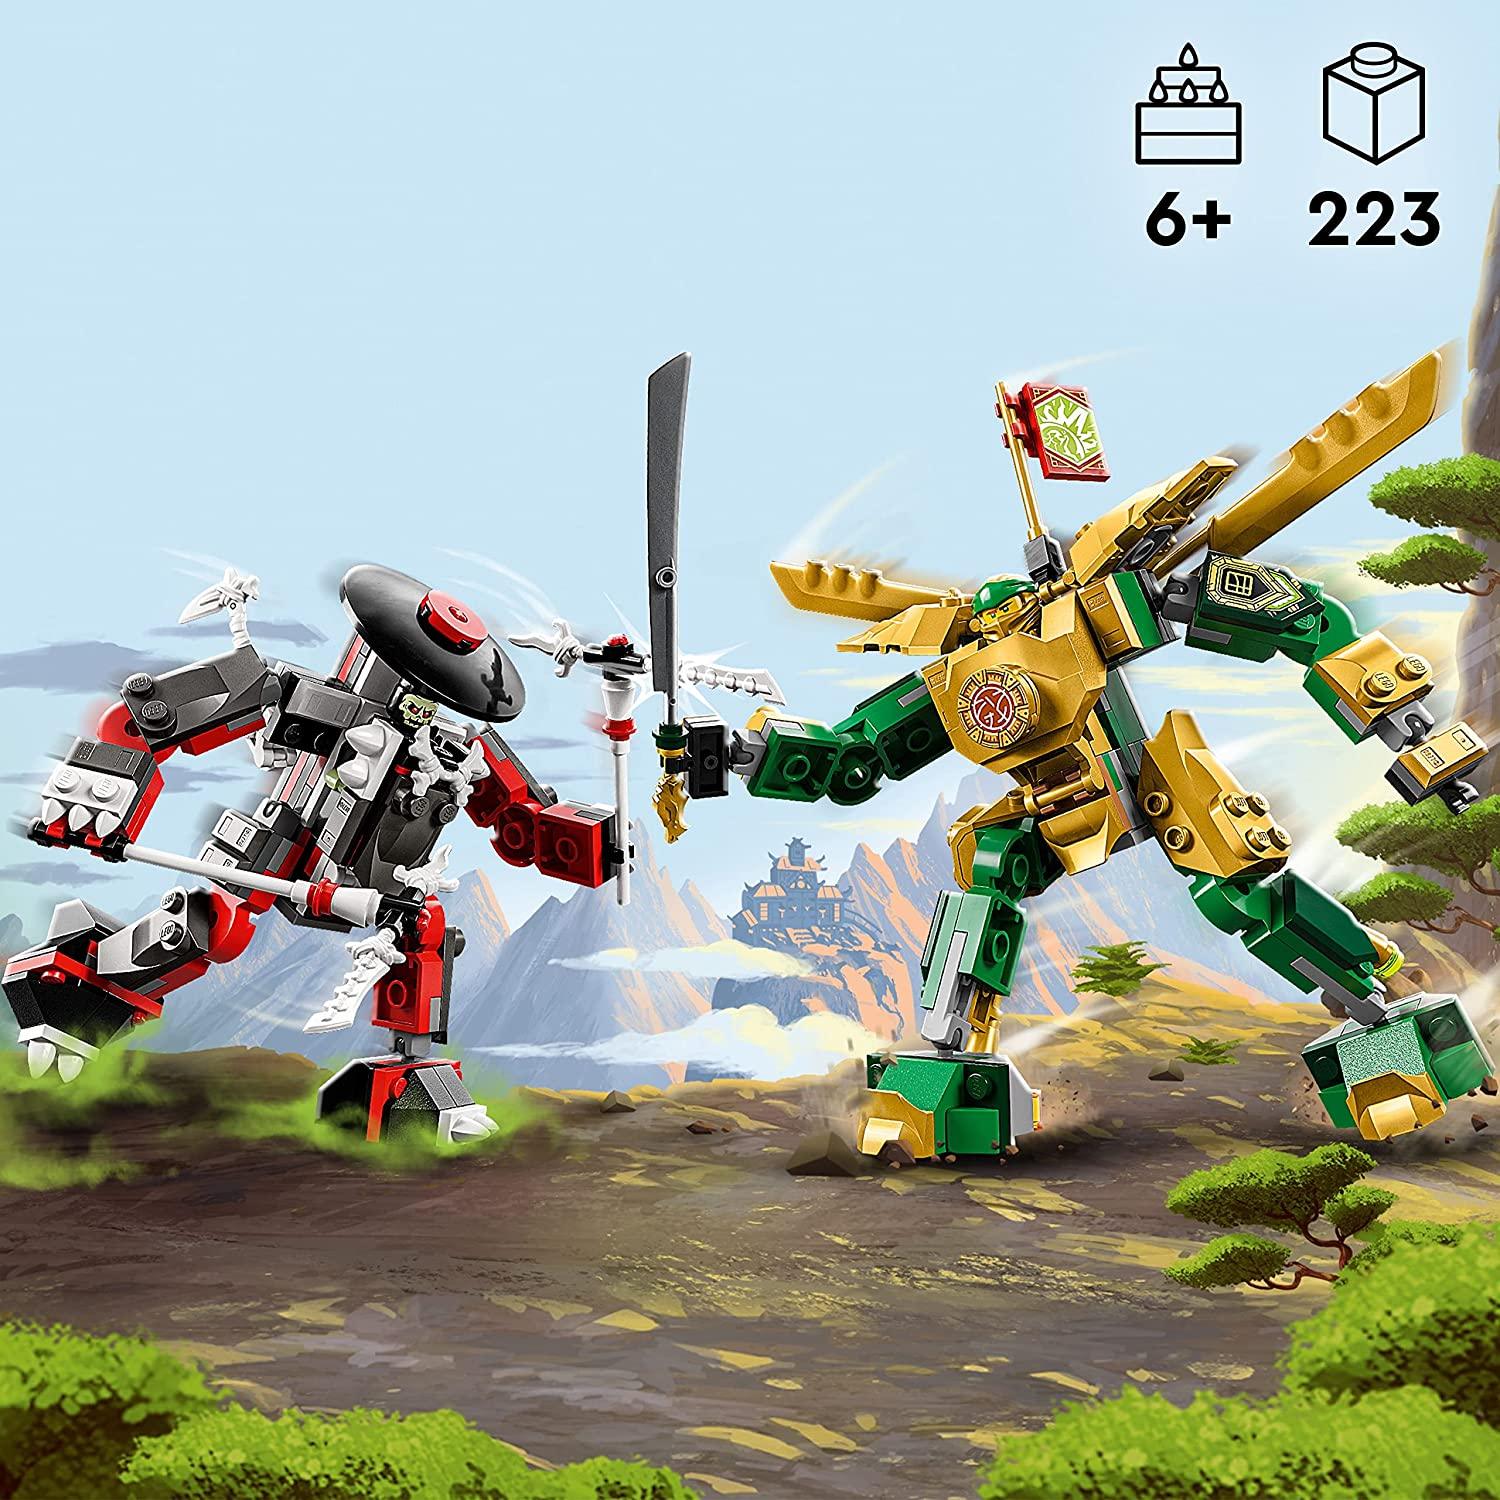 LEGO NINJAGO Lloyd’s Mech Battle EVO 71781, 2 Action Figures Set with Upgradable Figure, Toy for Kids Ages 6 Plus with Bone Warrior and Golden Lloyd Minifigures - BumbleToys - 5-7 Years, Boys, LEGO, Ninjago, OXE